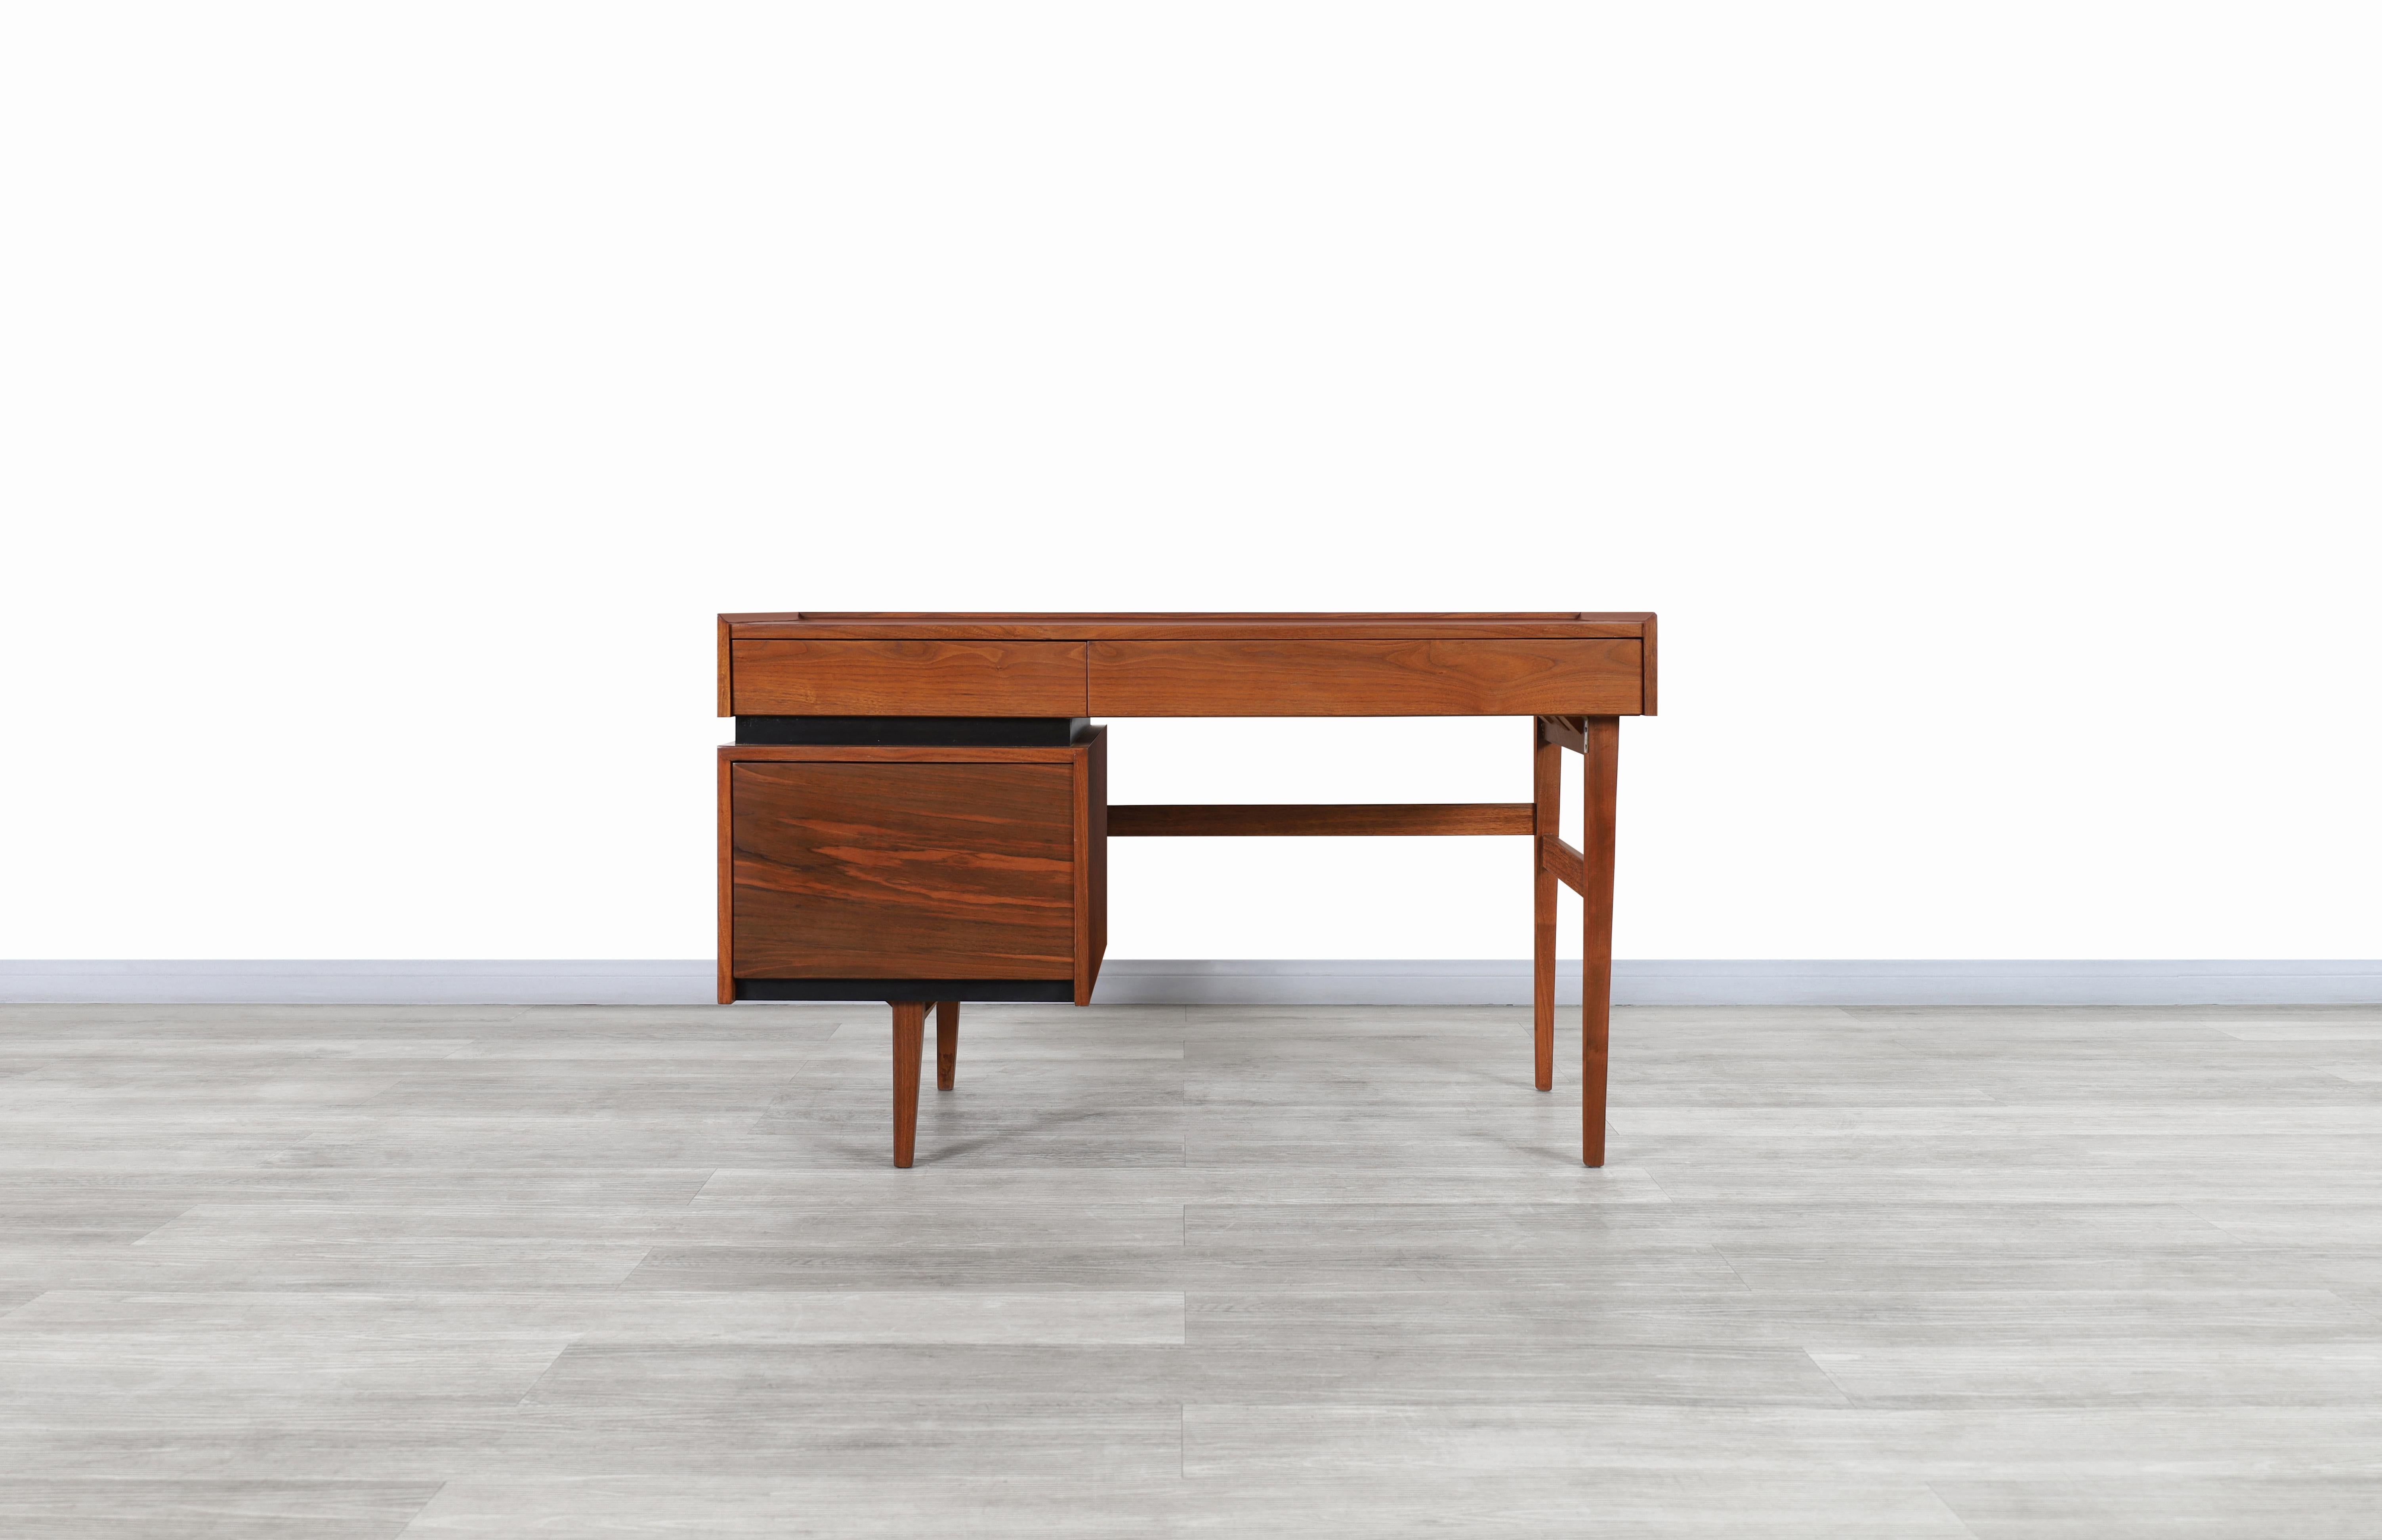 Fabulous vintage walnut “Esprit” desk designed by Merton L. Gershun for Dillingham Mfg. Co. in the United States, circa 1960s. This desk belongs to the 